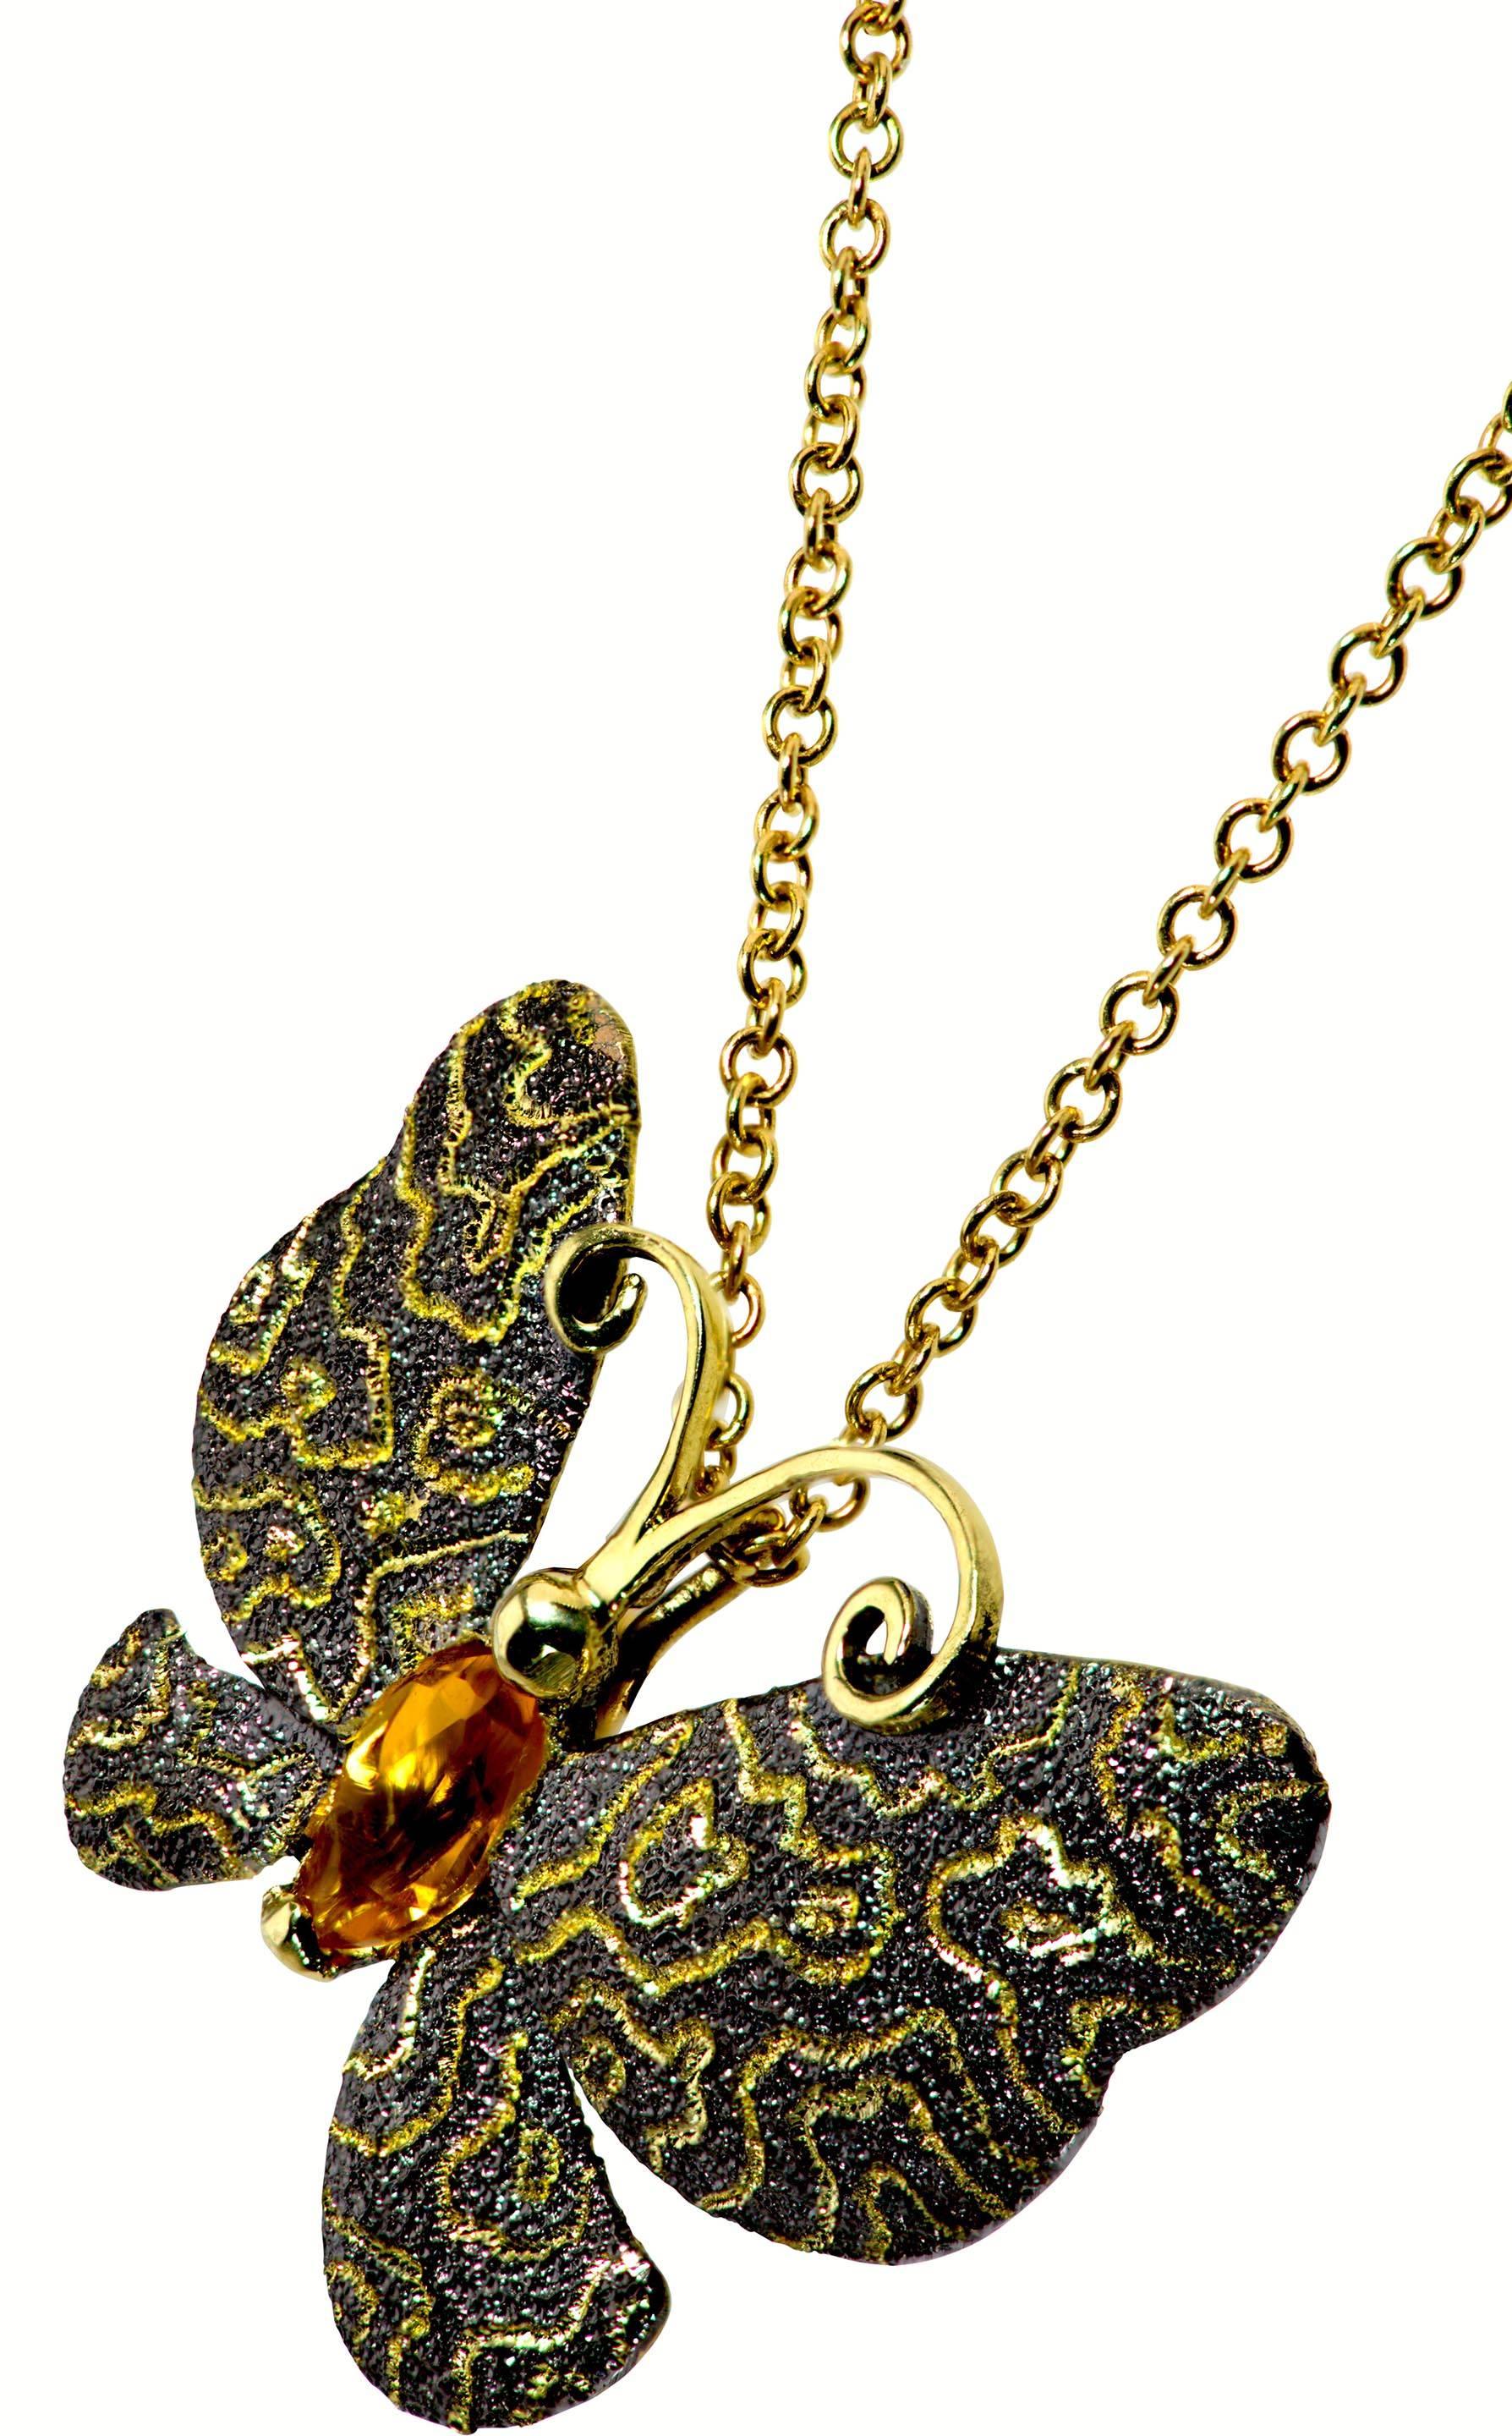 Alex Soldier's Butterfly collection is dedicated to celebration of life. Butterflies remind us to enjoy the moment and embrace change. Made in 18 karat yellow gold with honey citrine (0.3 ct), this lovely butterfly pendant/pin is suspended on 18